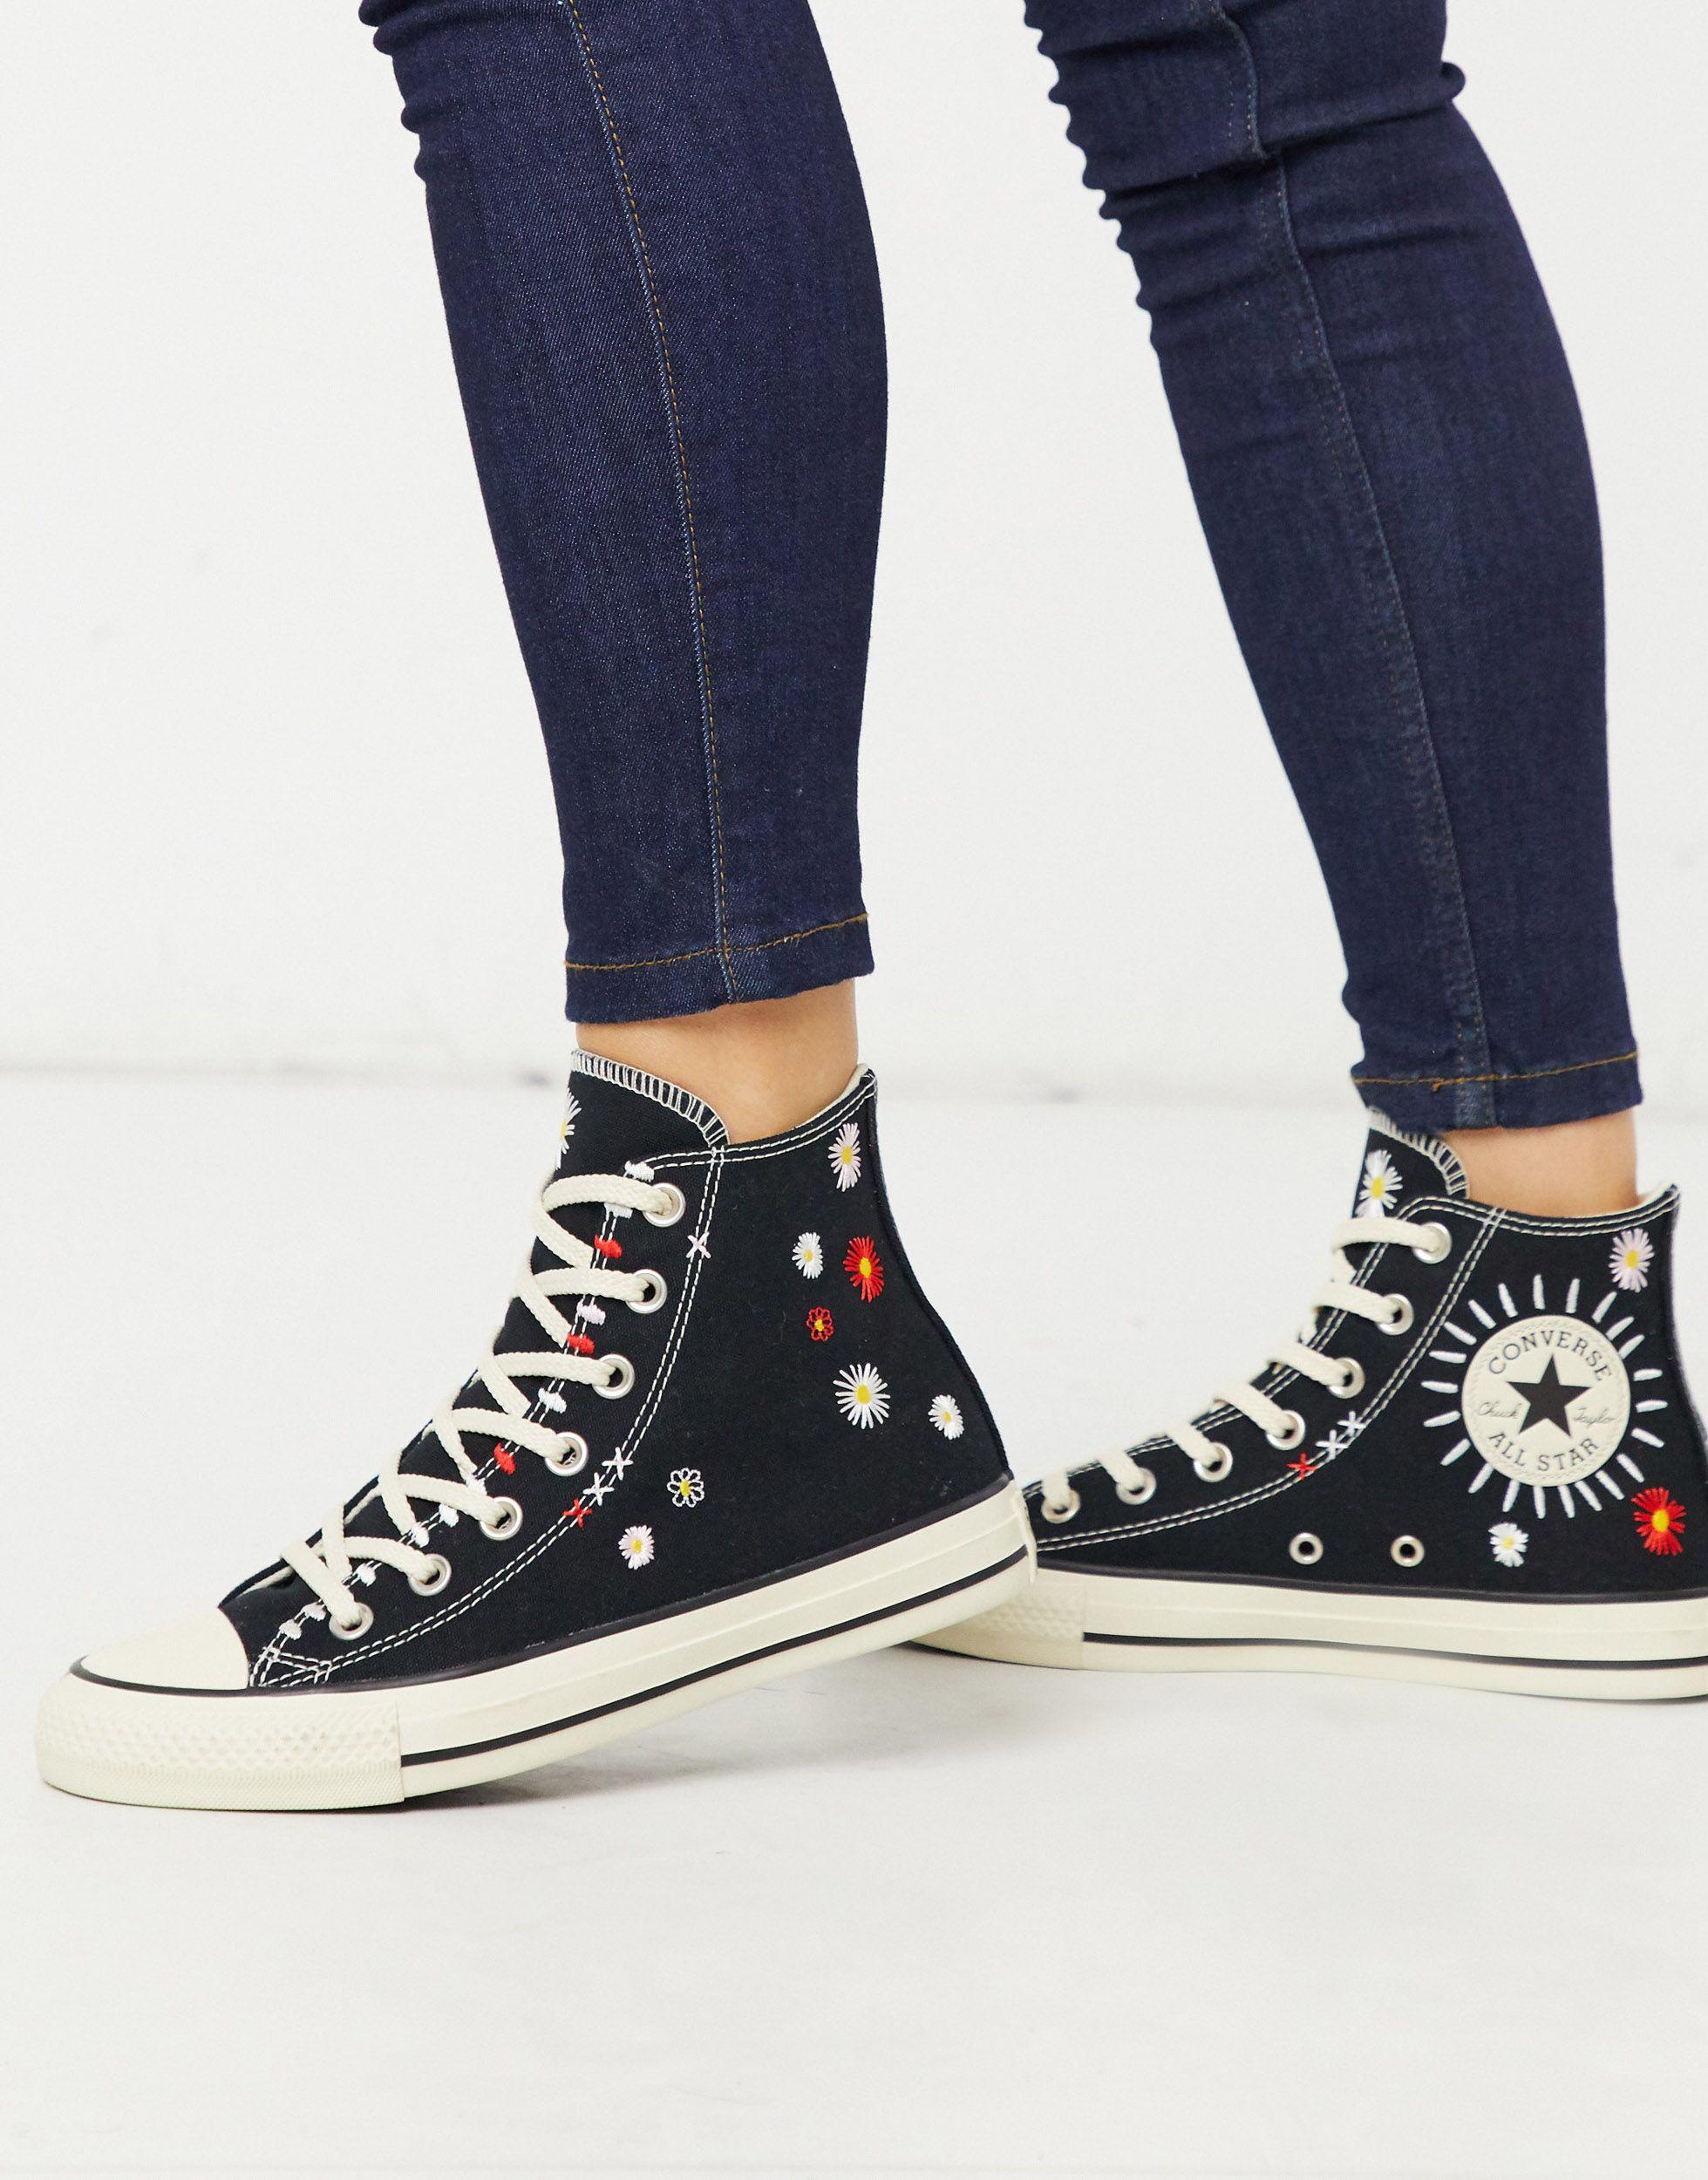 Converse Rubber Chuck Taylor All Star Hi Black Embroidered Floral Sneakers  - Lyst